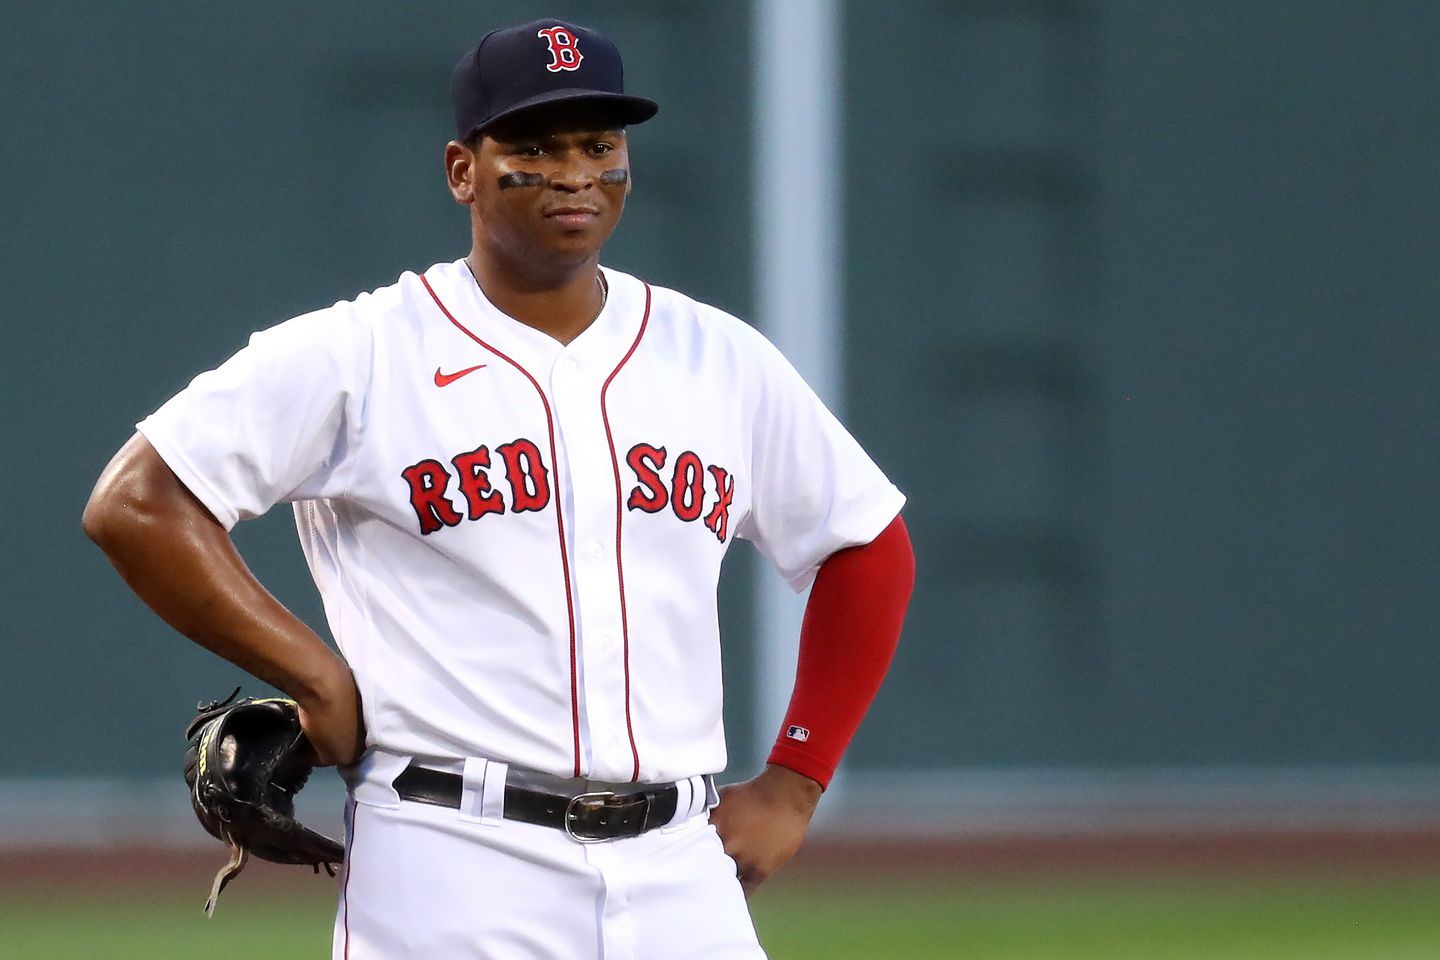 BOSTON, MASSACHUSETTS - AUGUST 12: Red Sox third baseman Rafael Devers, who had a promising outlook at the start of the season, has been plagued with on-field struggles in the first 19 games he's played. MLB